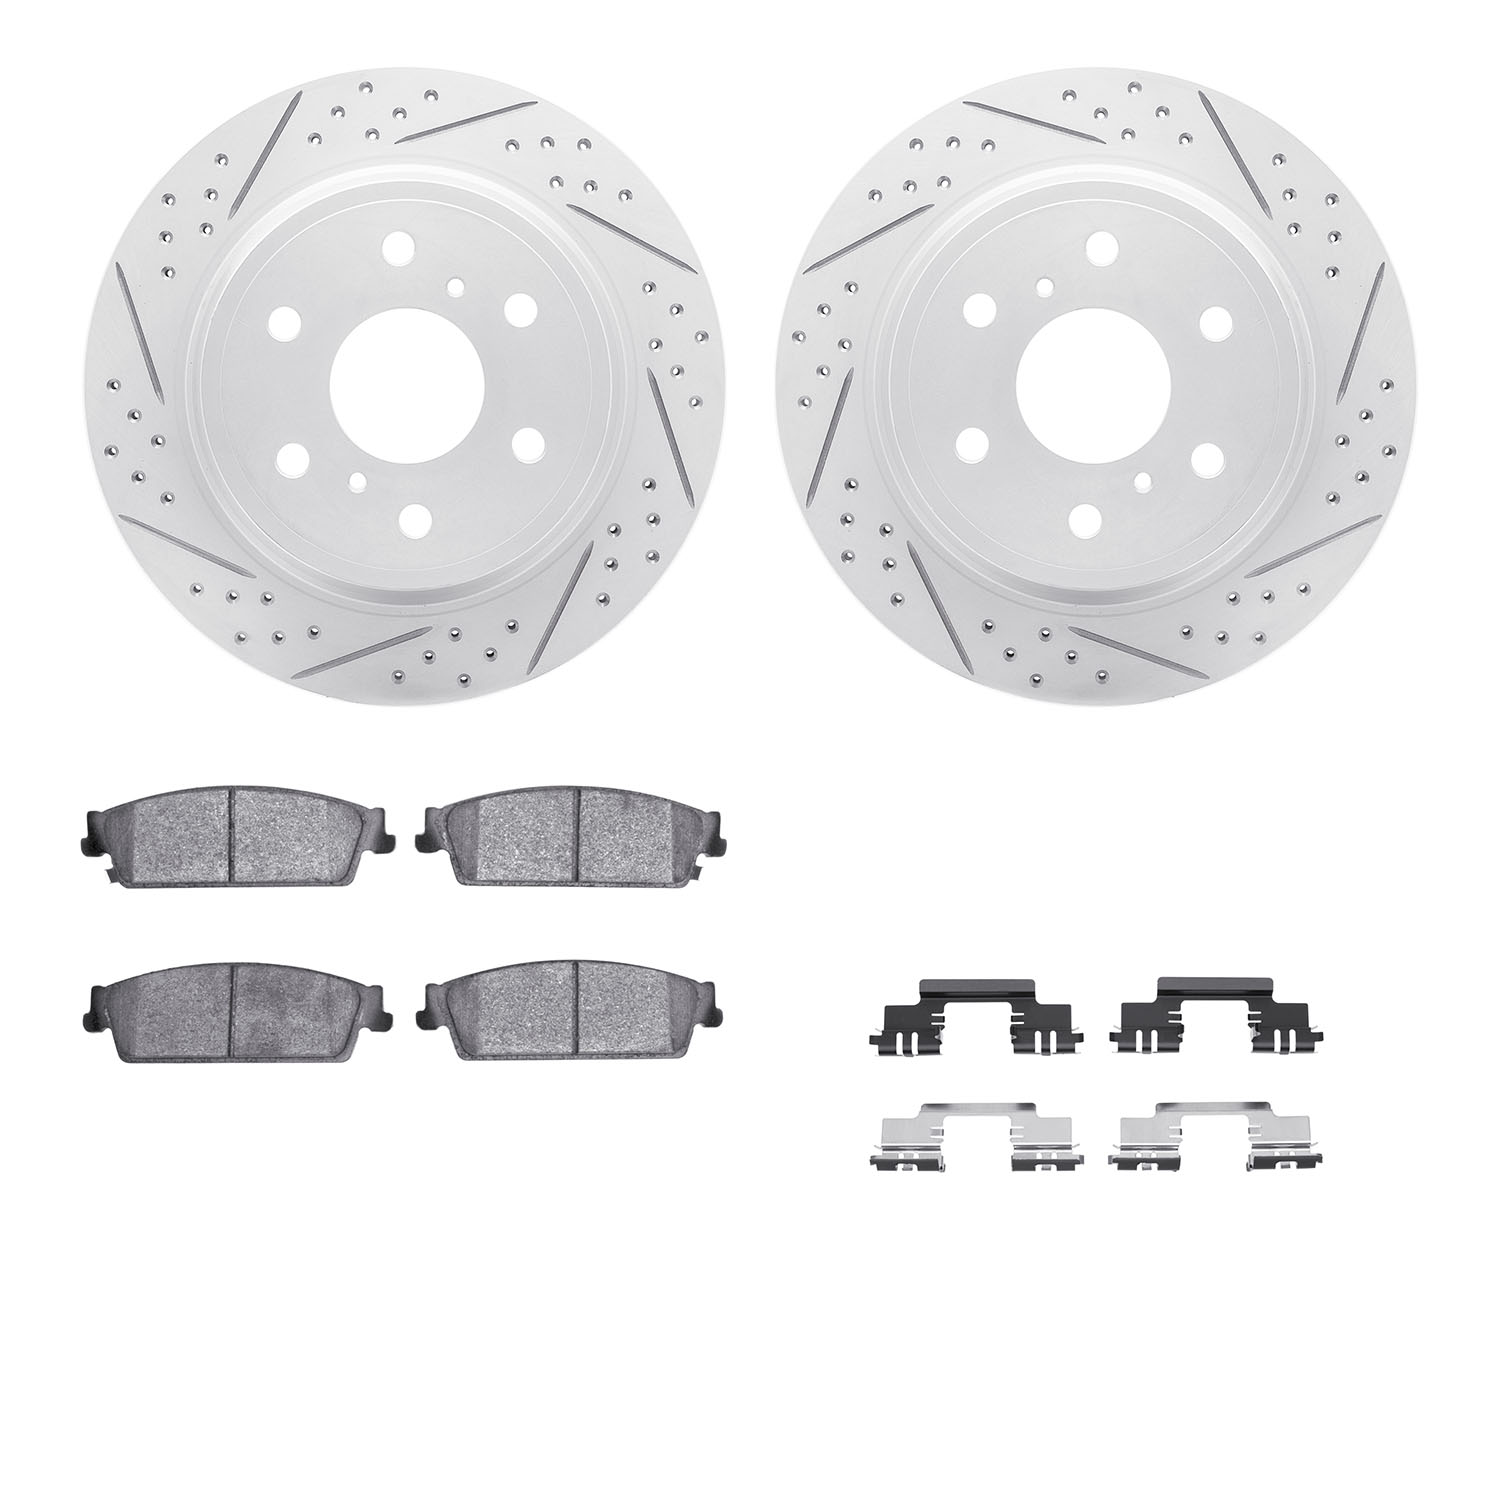 2212-48043 Geoperformance Drilled/Slotted Rotors w/Heavy-Duty Pads Kit & Hardware, 2007-2014 GM, Position: Rear